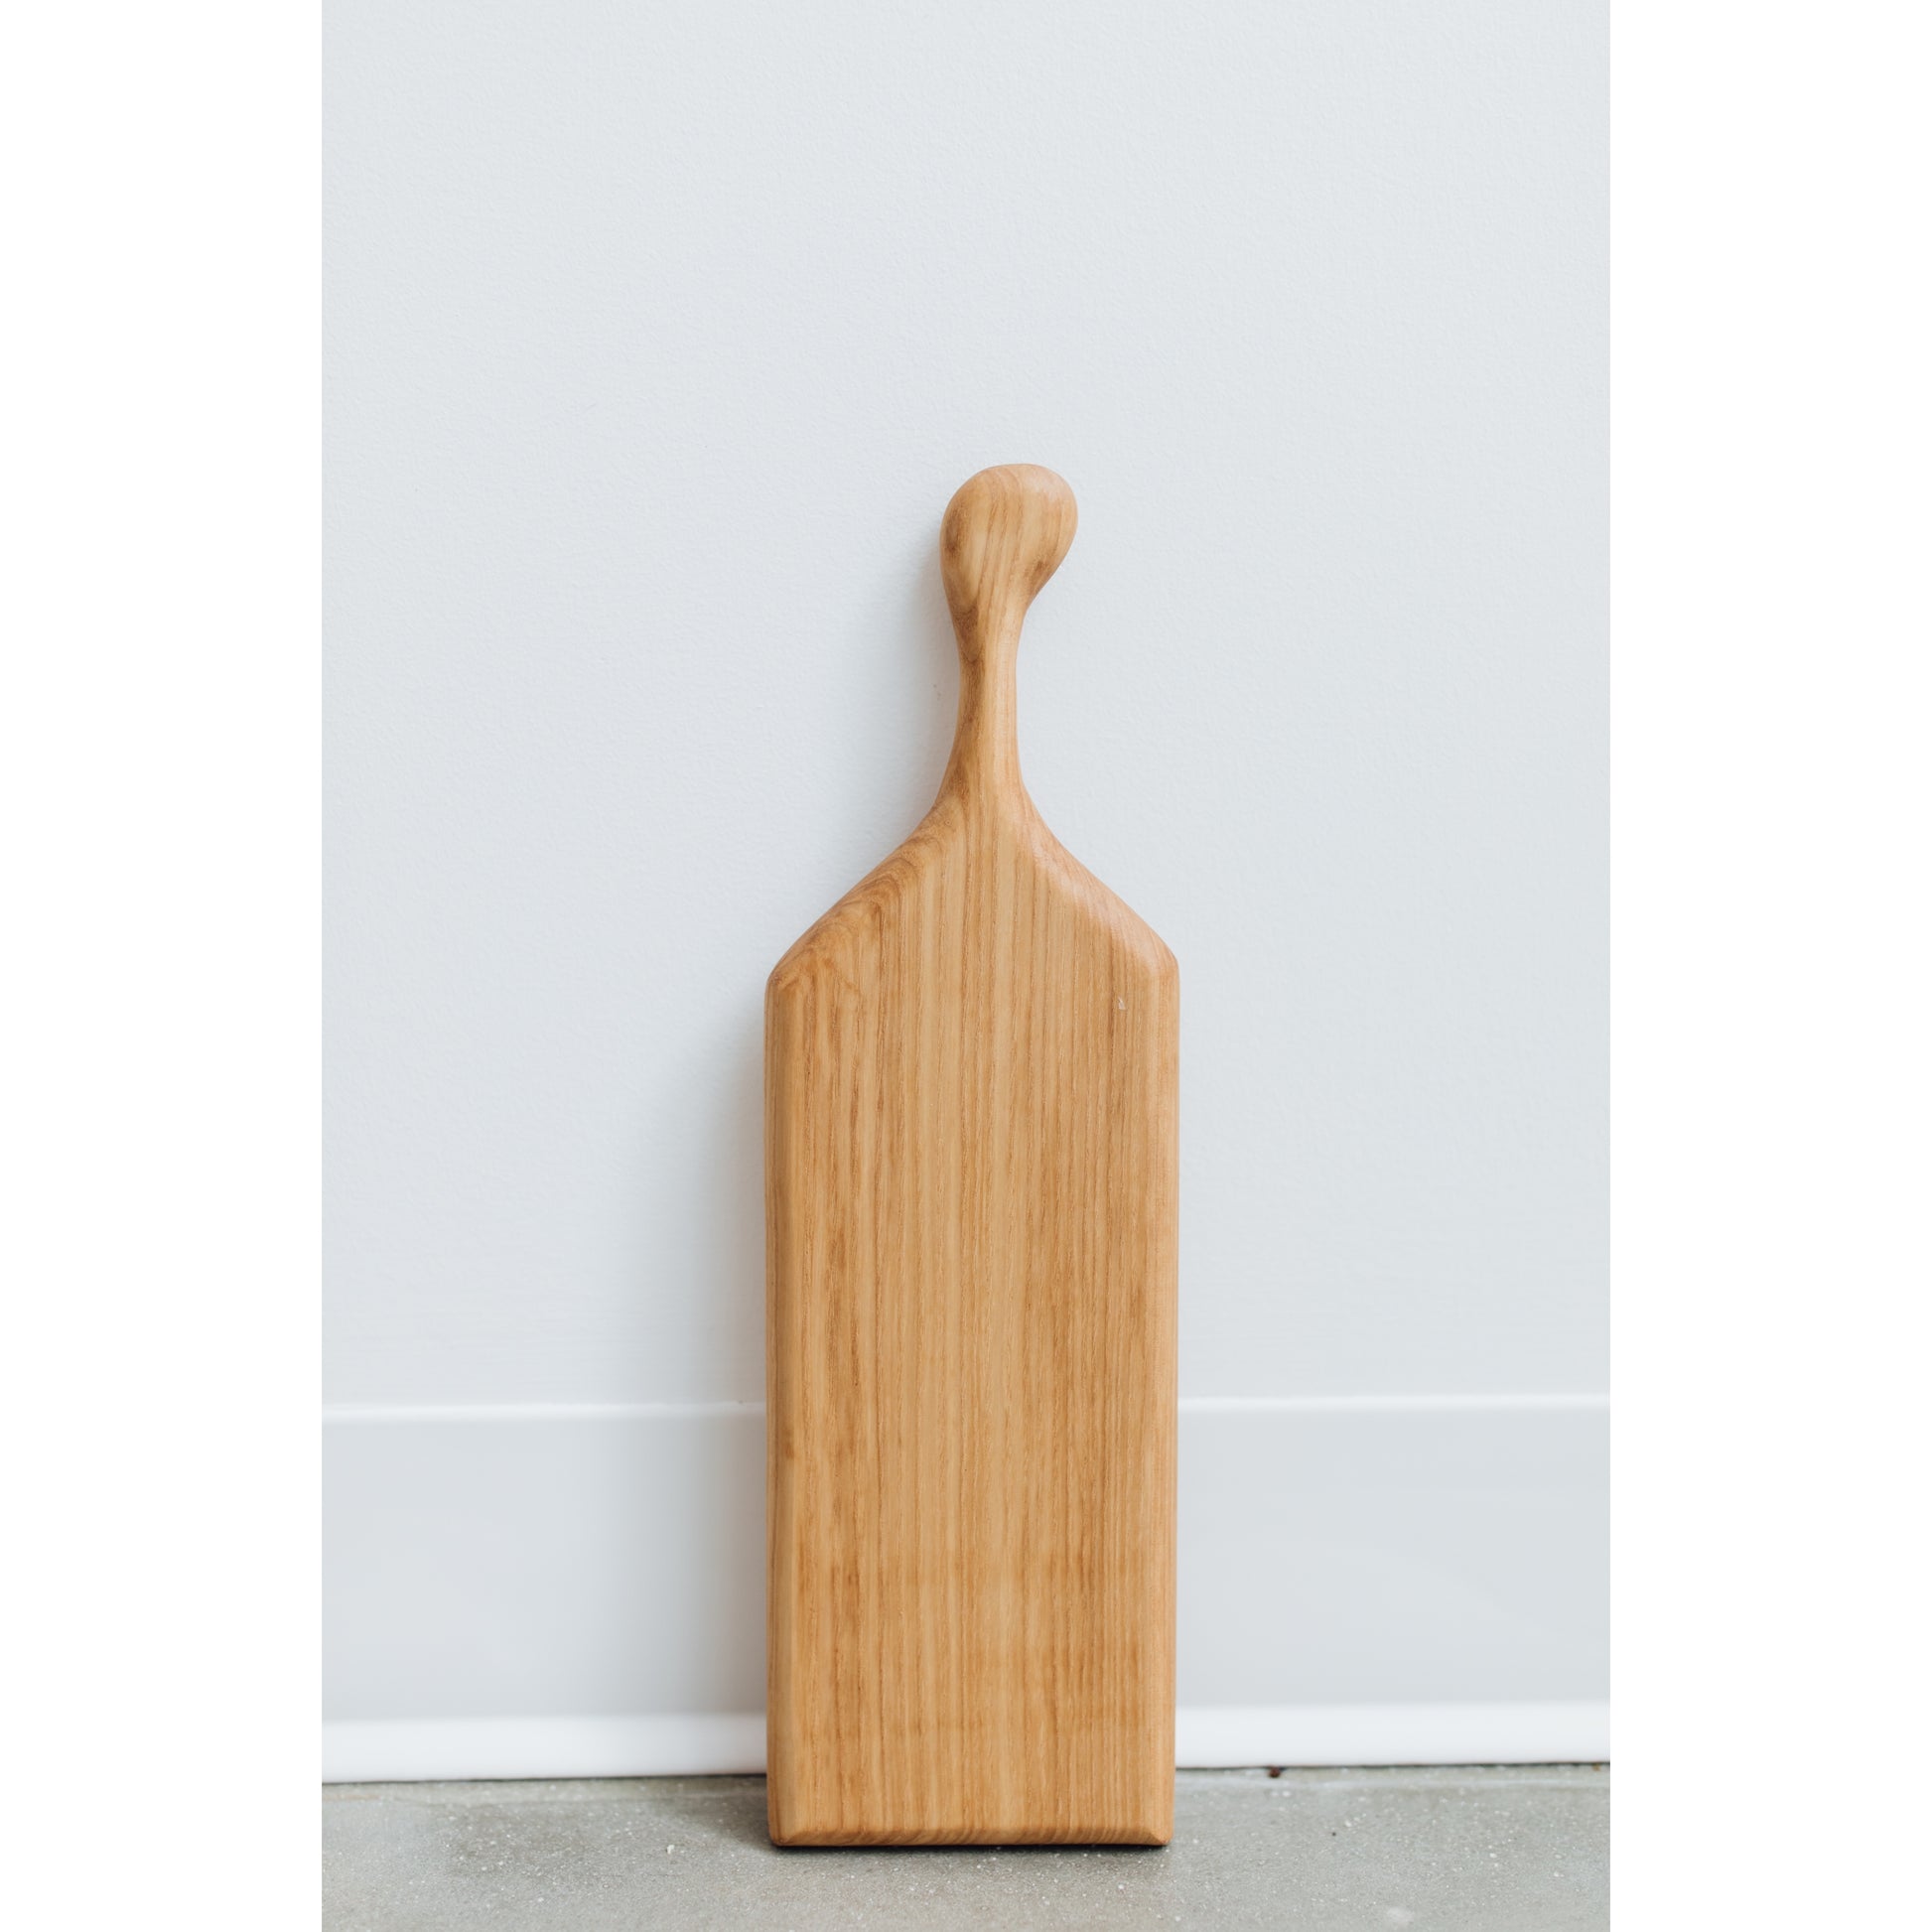 Hand-crafted cheeseboard perfect for a small sampling of cheese or appetizers. The handle is perfect for carrying to the table, and adds visual interest. Made sustainably from maple wood in Gatineau, Canada.